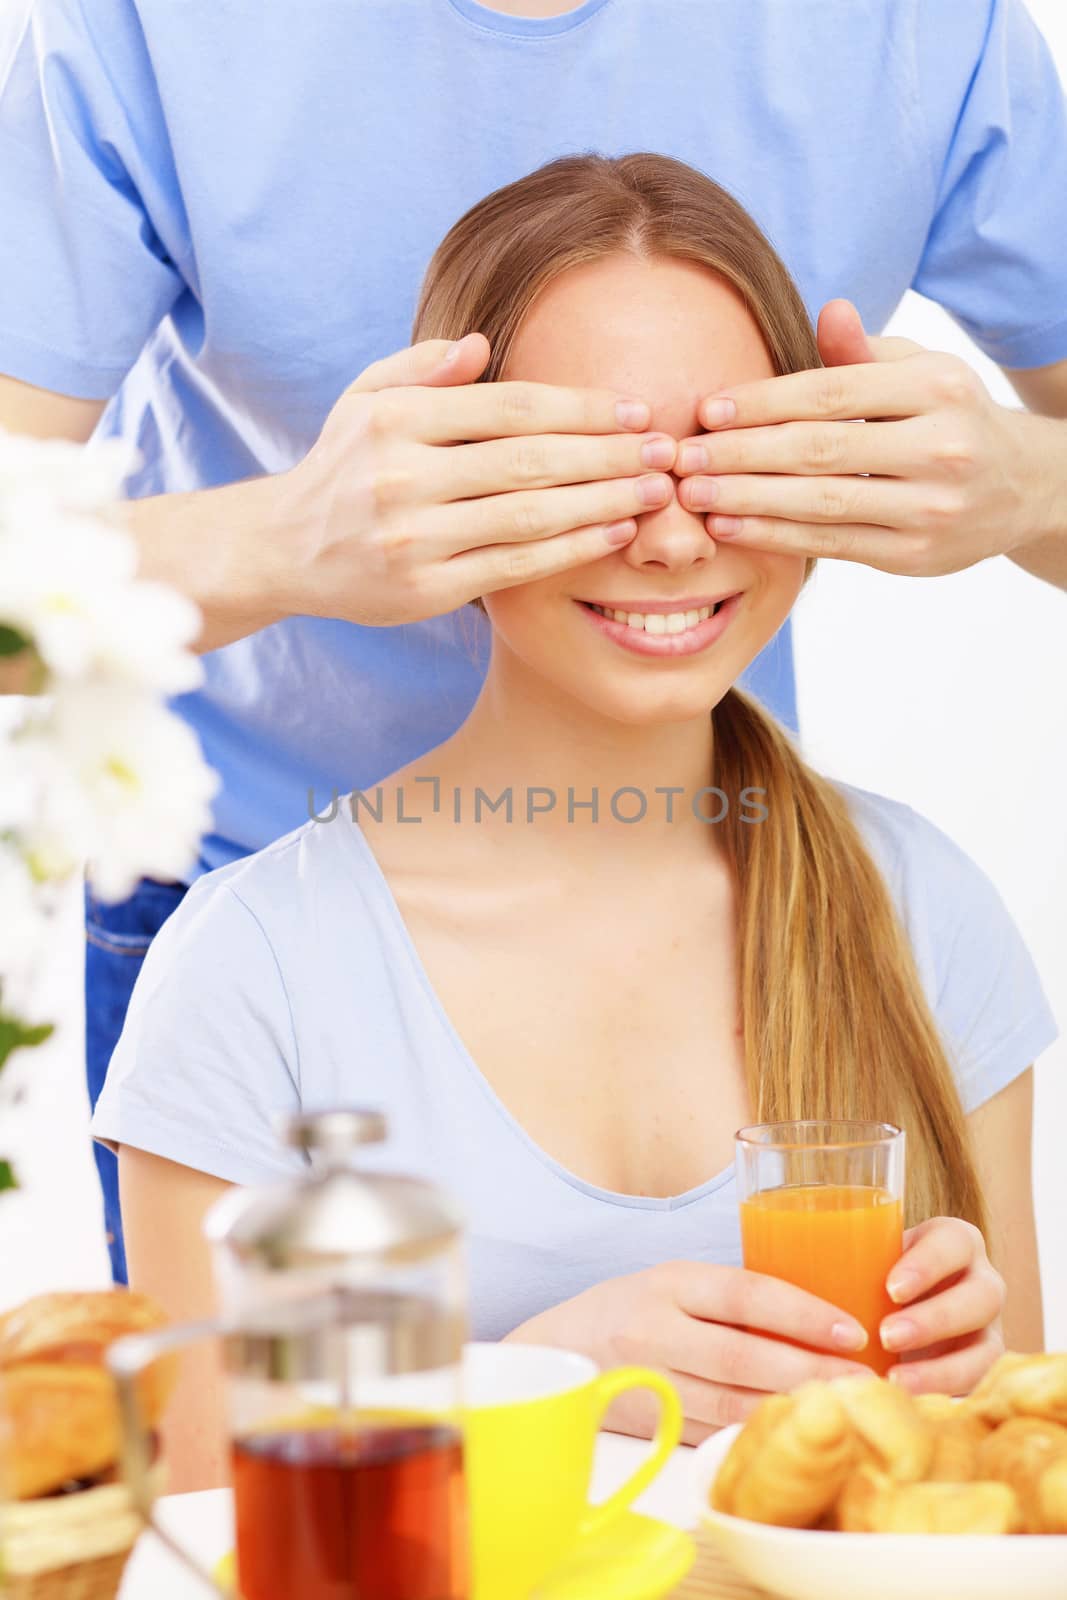 Young couple at home together - closing partner's eyes